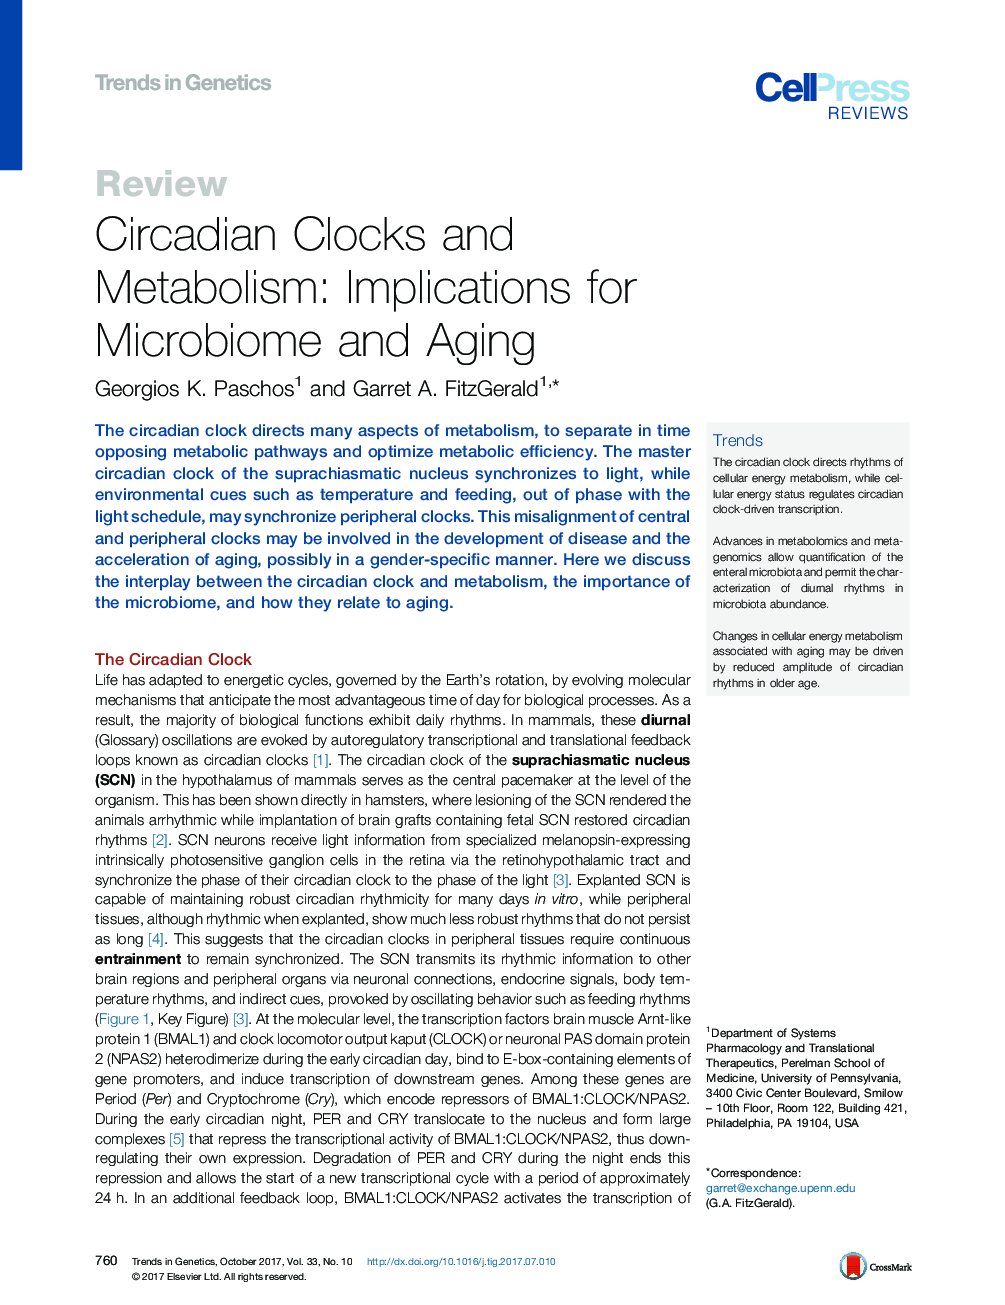 Circadian Clocks and Metabolism: Implications for Microbiome and Aging